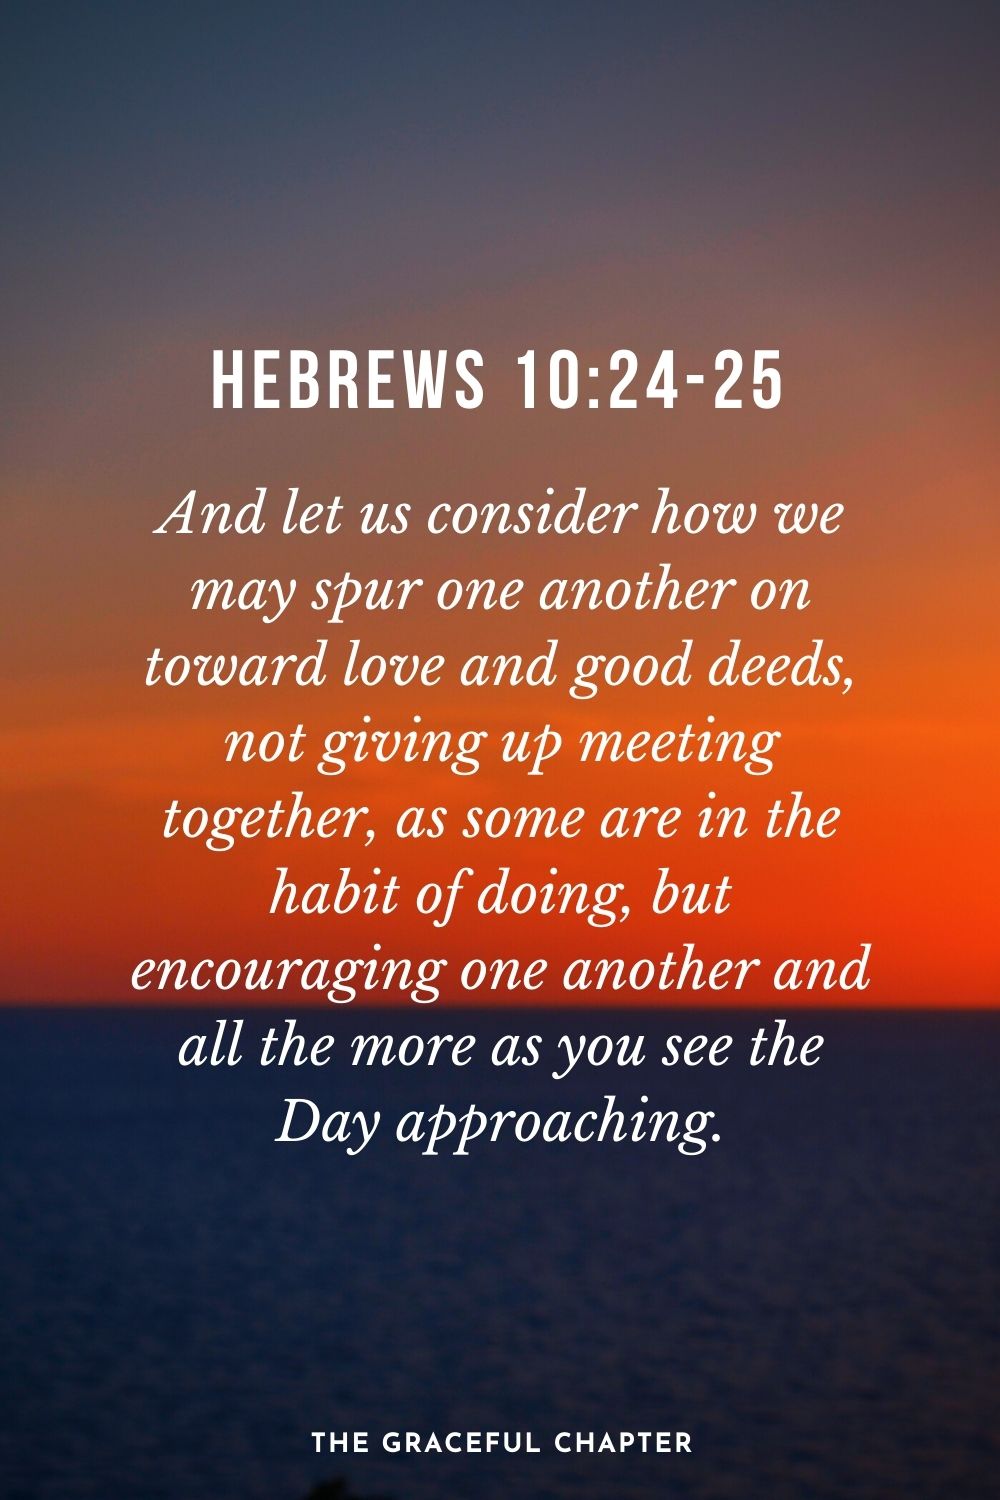 And let us consider how we may spur one another on toward love and good deeds, not giving up meeting together, as some are in the habit of doing, but encouraging one another and all the more as you see the Day approaching. Hebrews 10:24-25